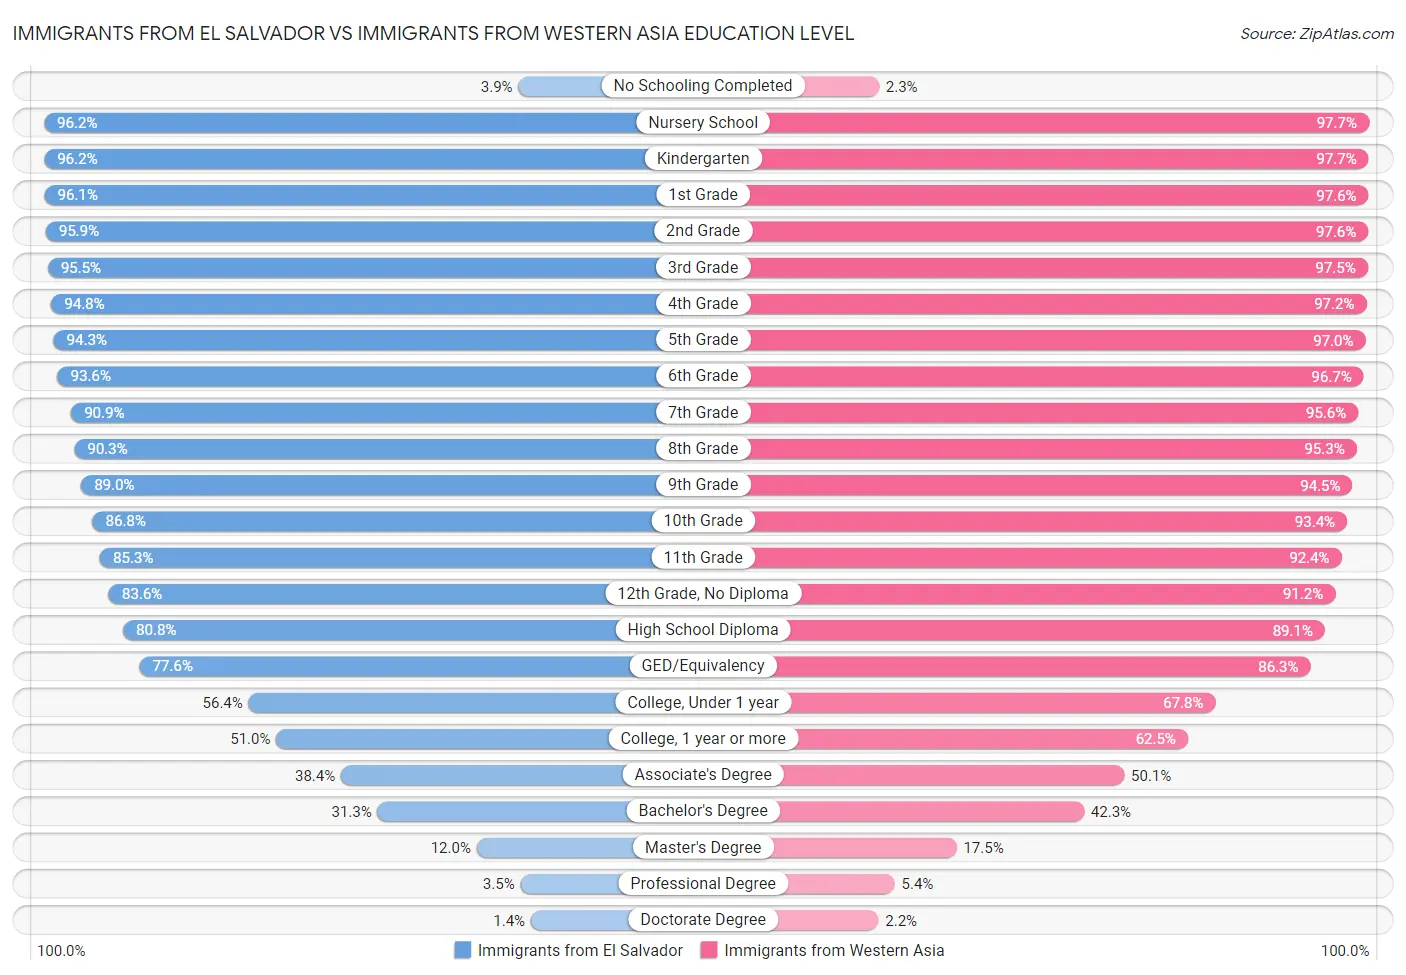 Immigrants from El Salvador vs Immigrants from Western Asia Education Level